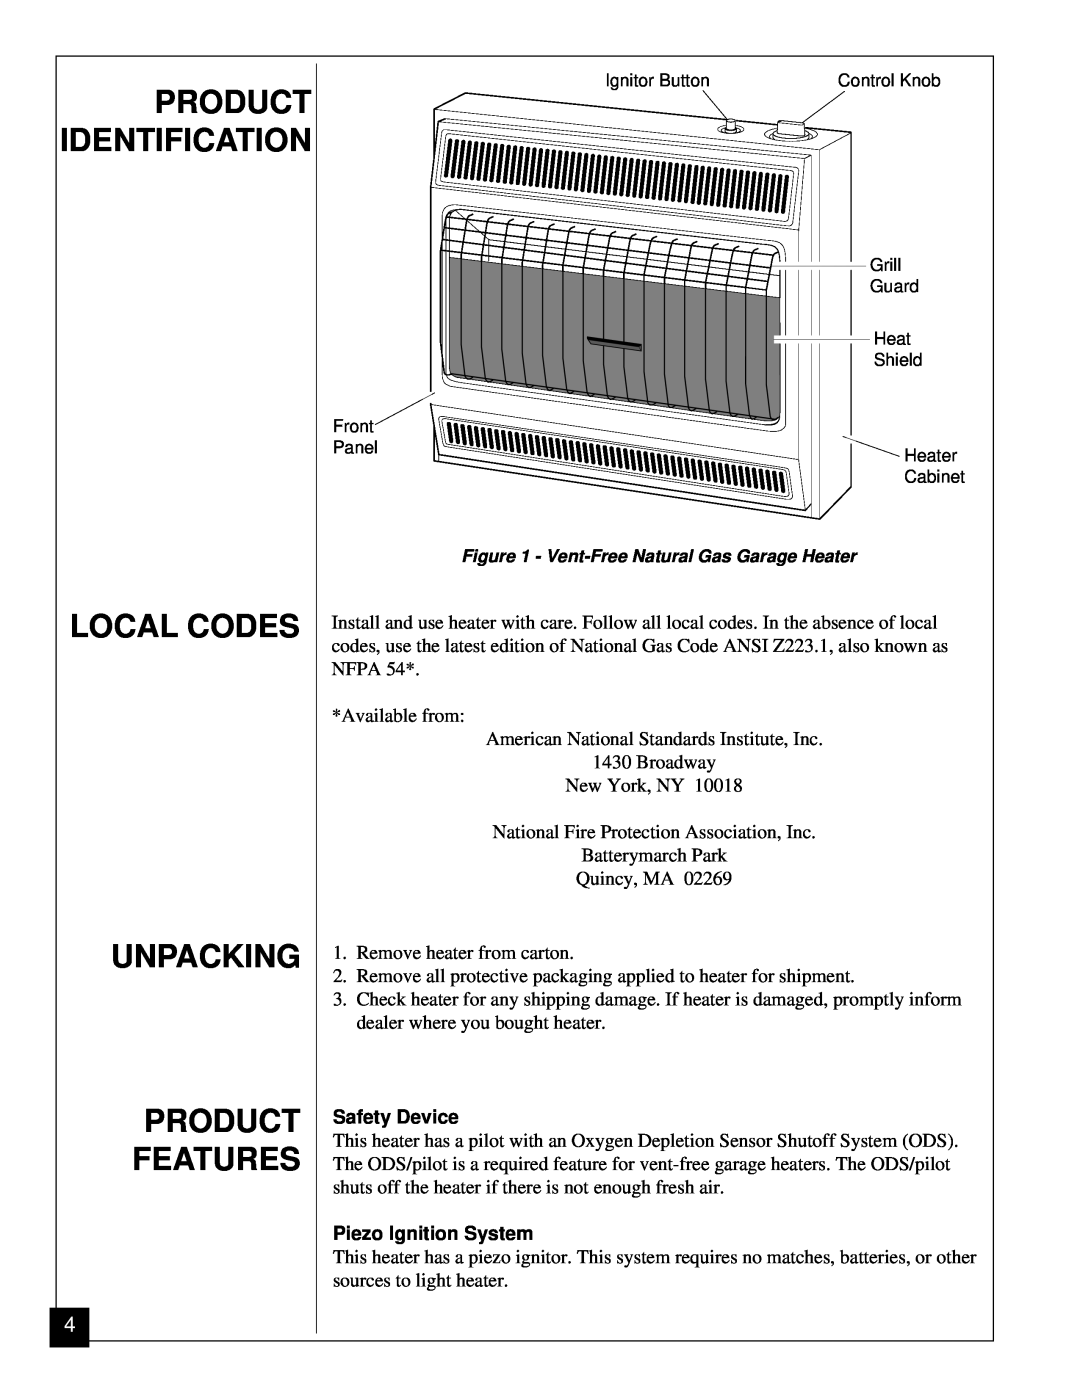 Vanguard Heating VGN30 installation manual Local Codes Unpacking Product Features, Product Identification 